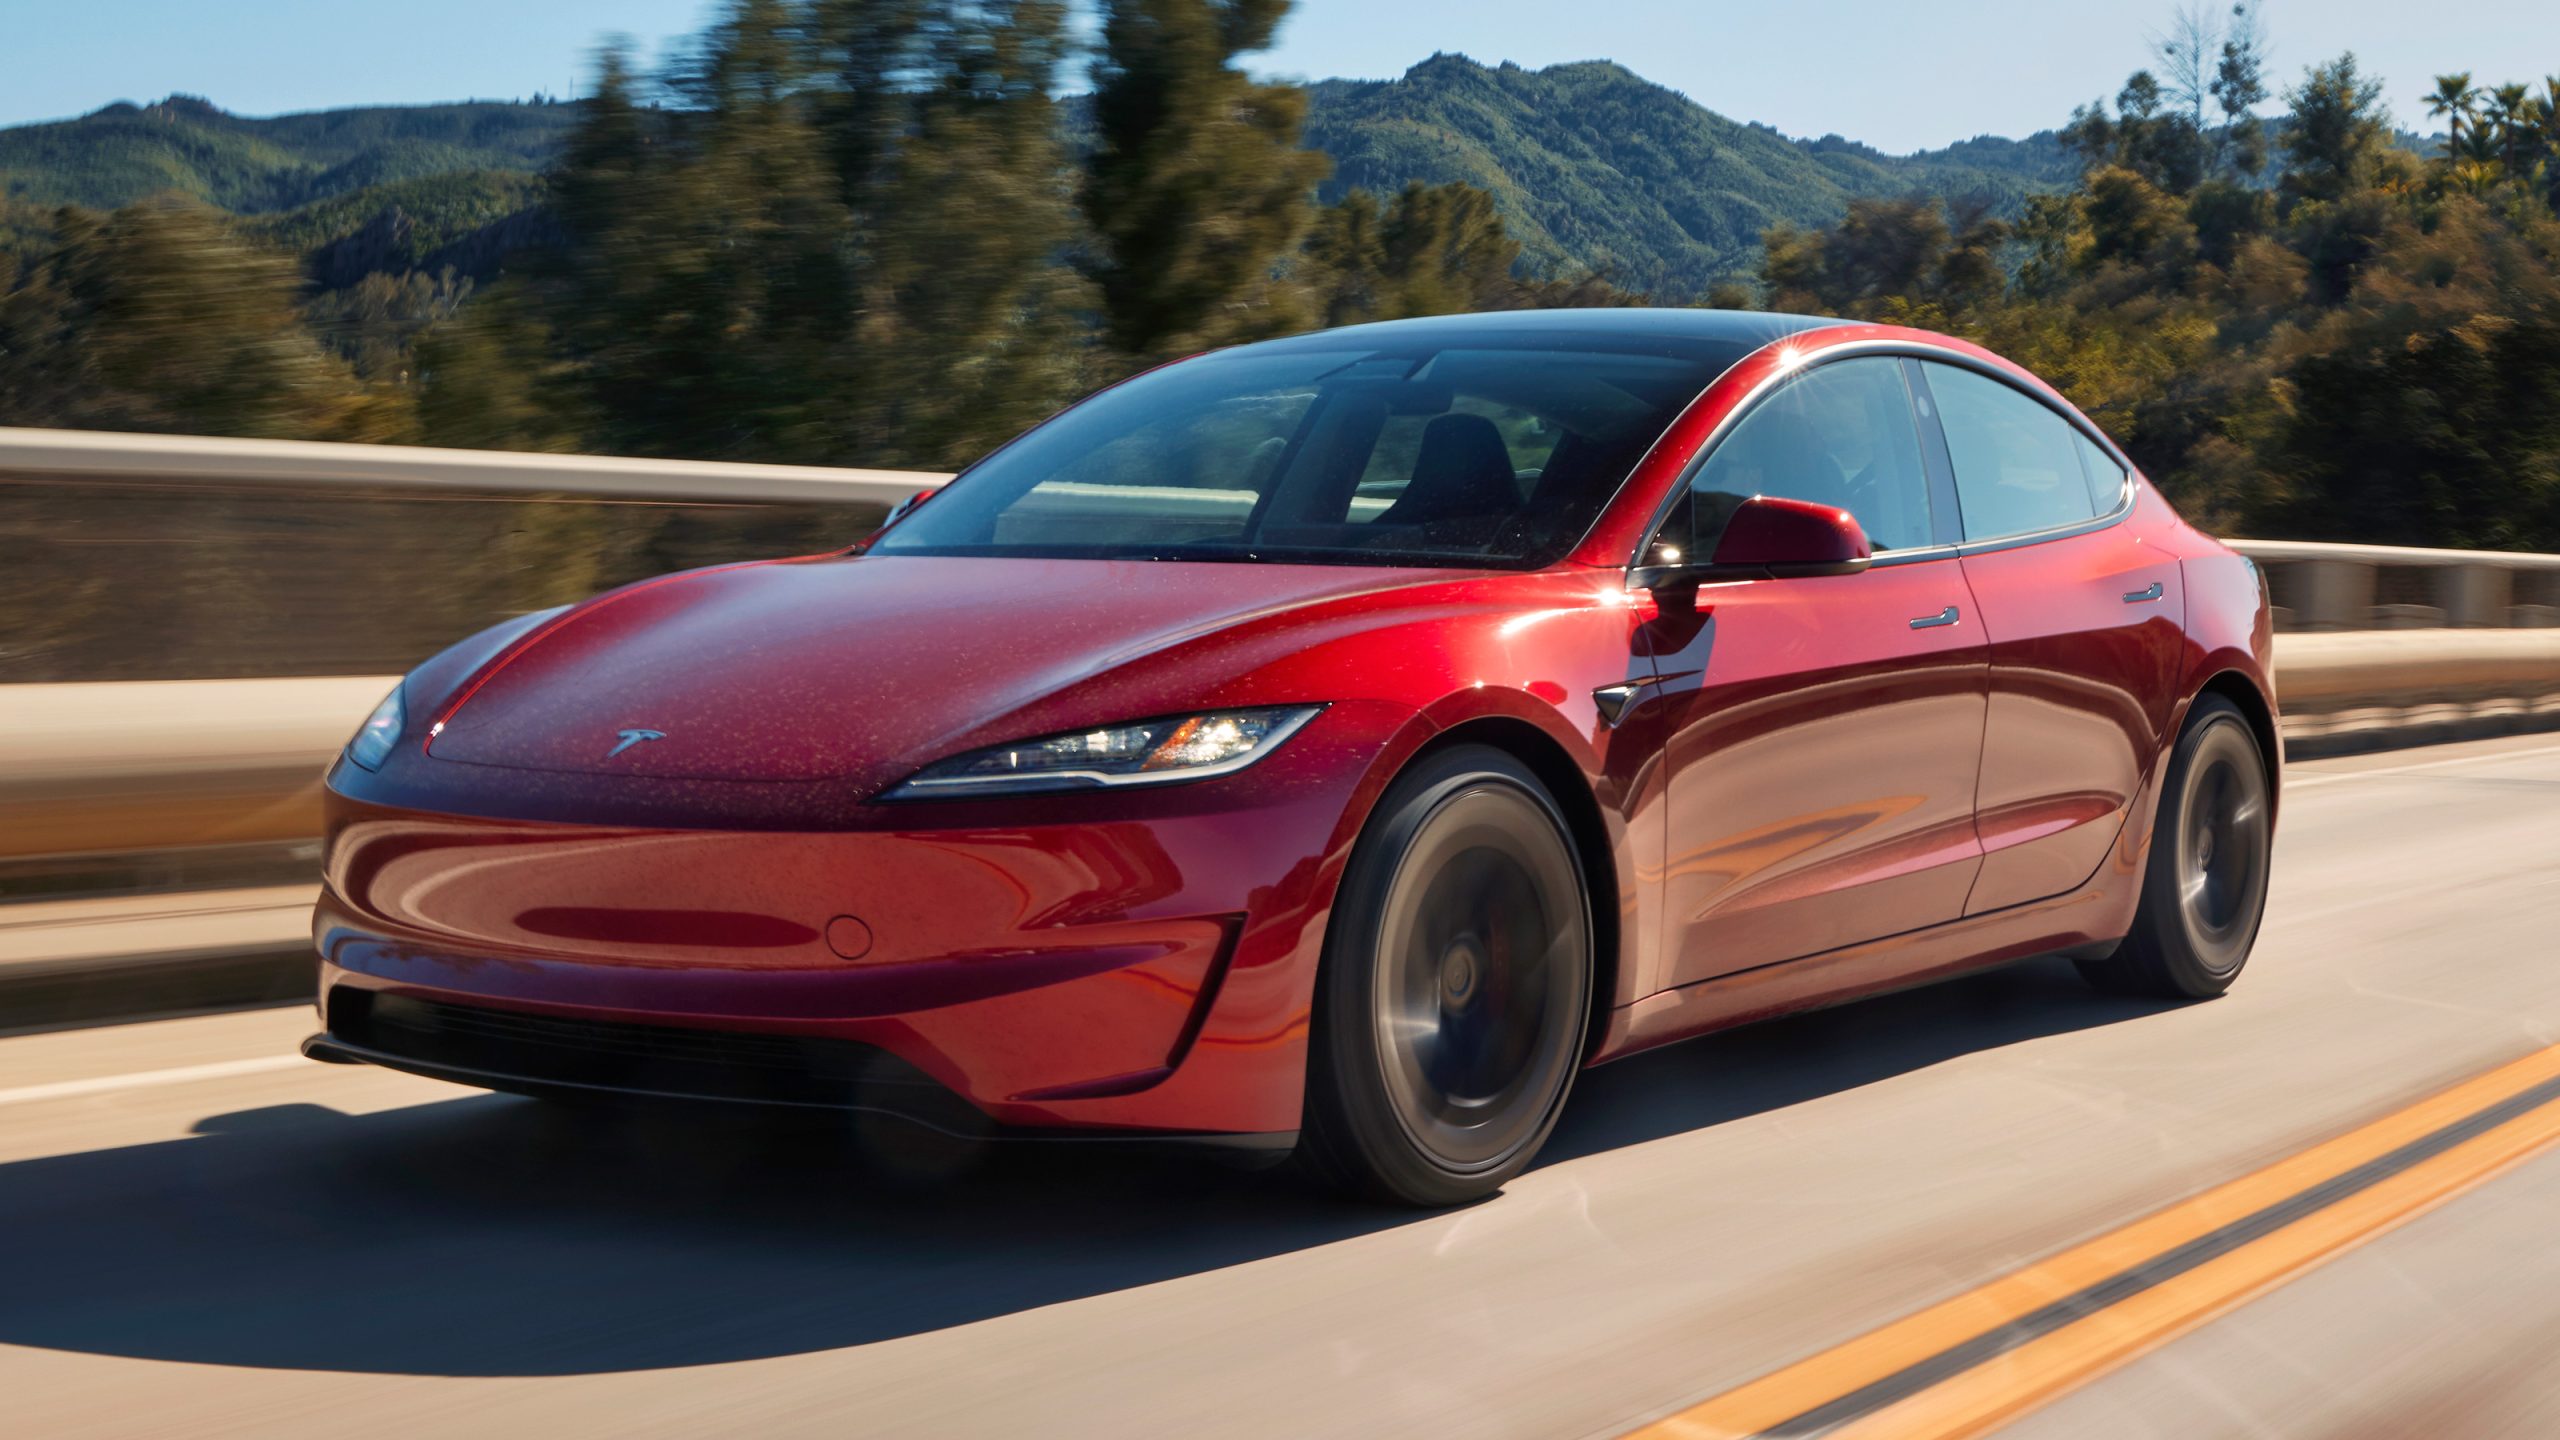 EPA Delivers Good News for Tesla Model 3 Performance Owners